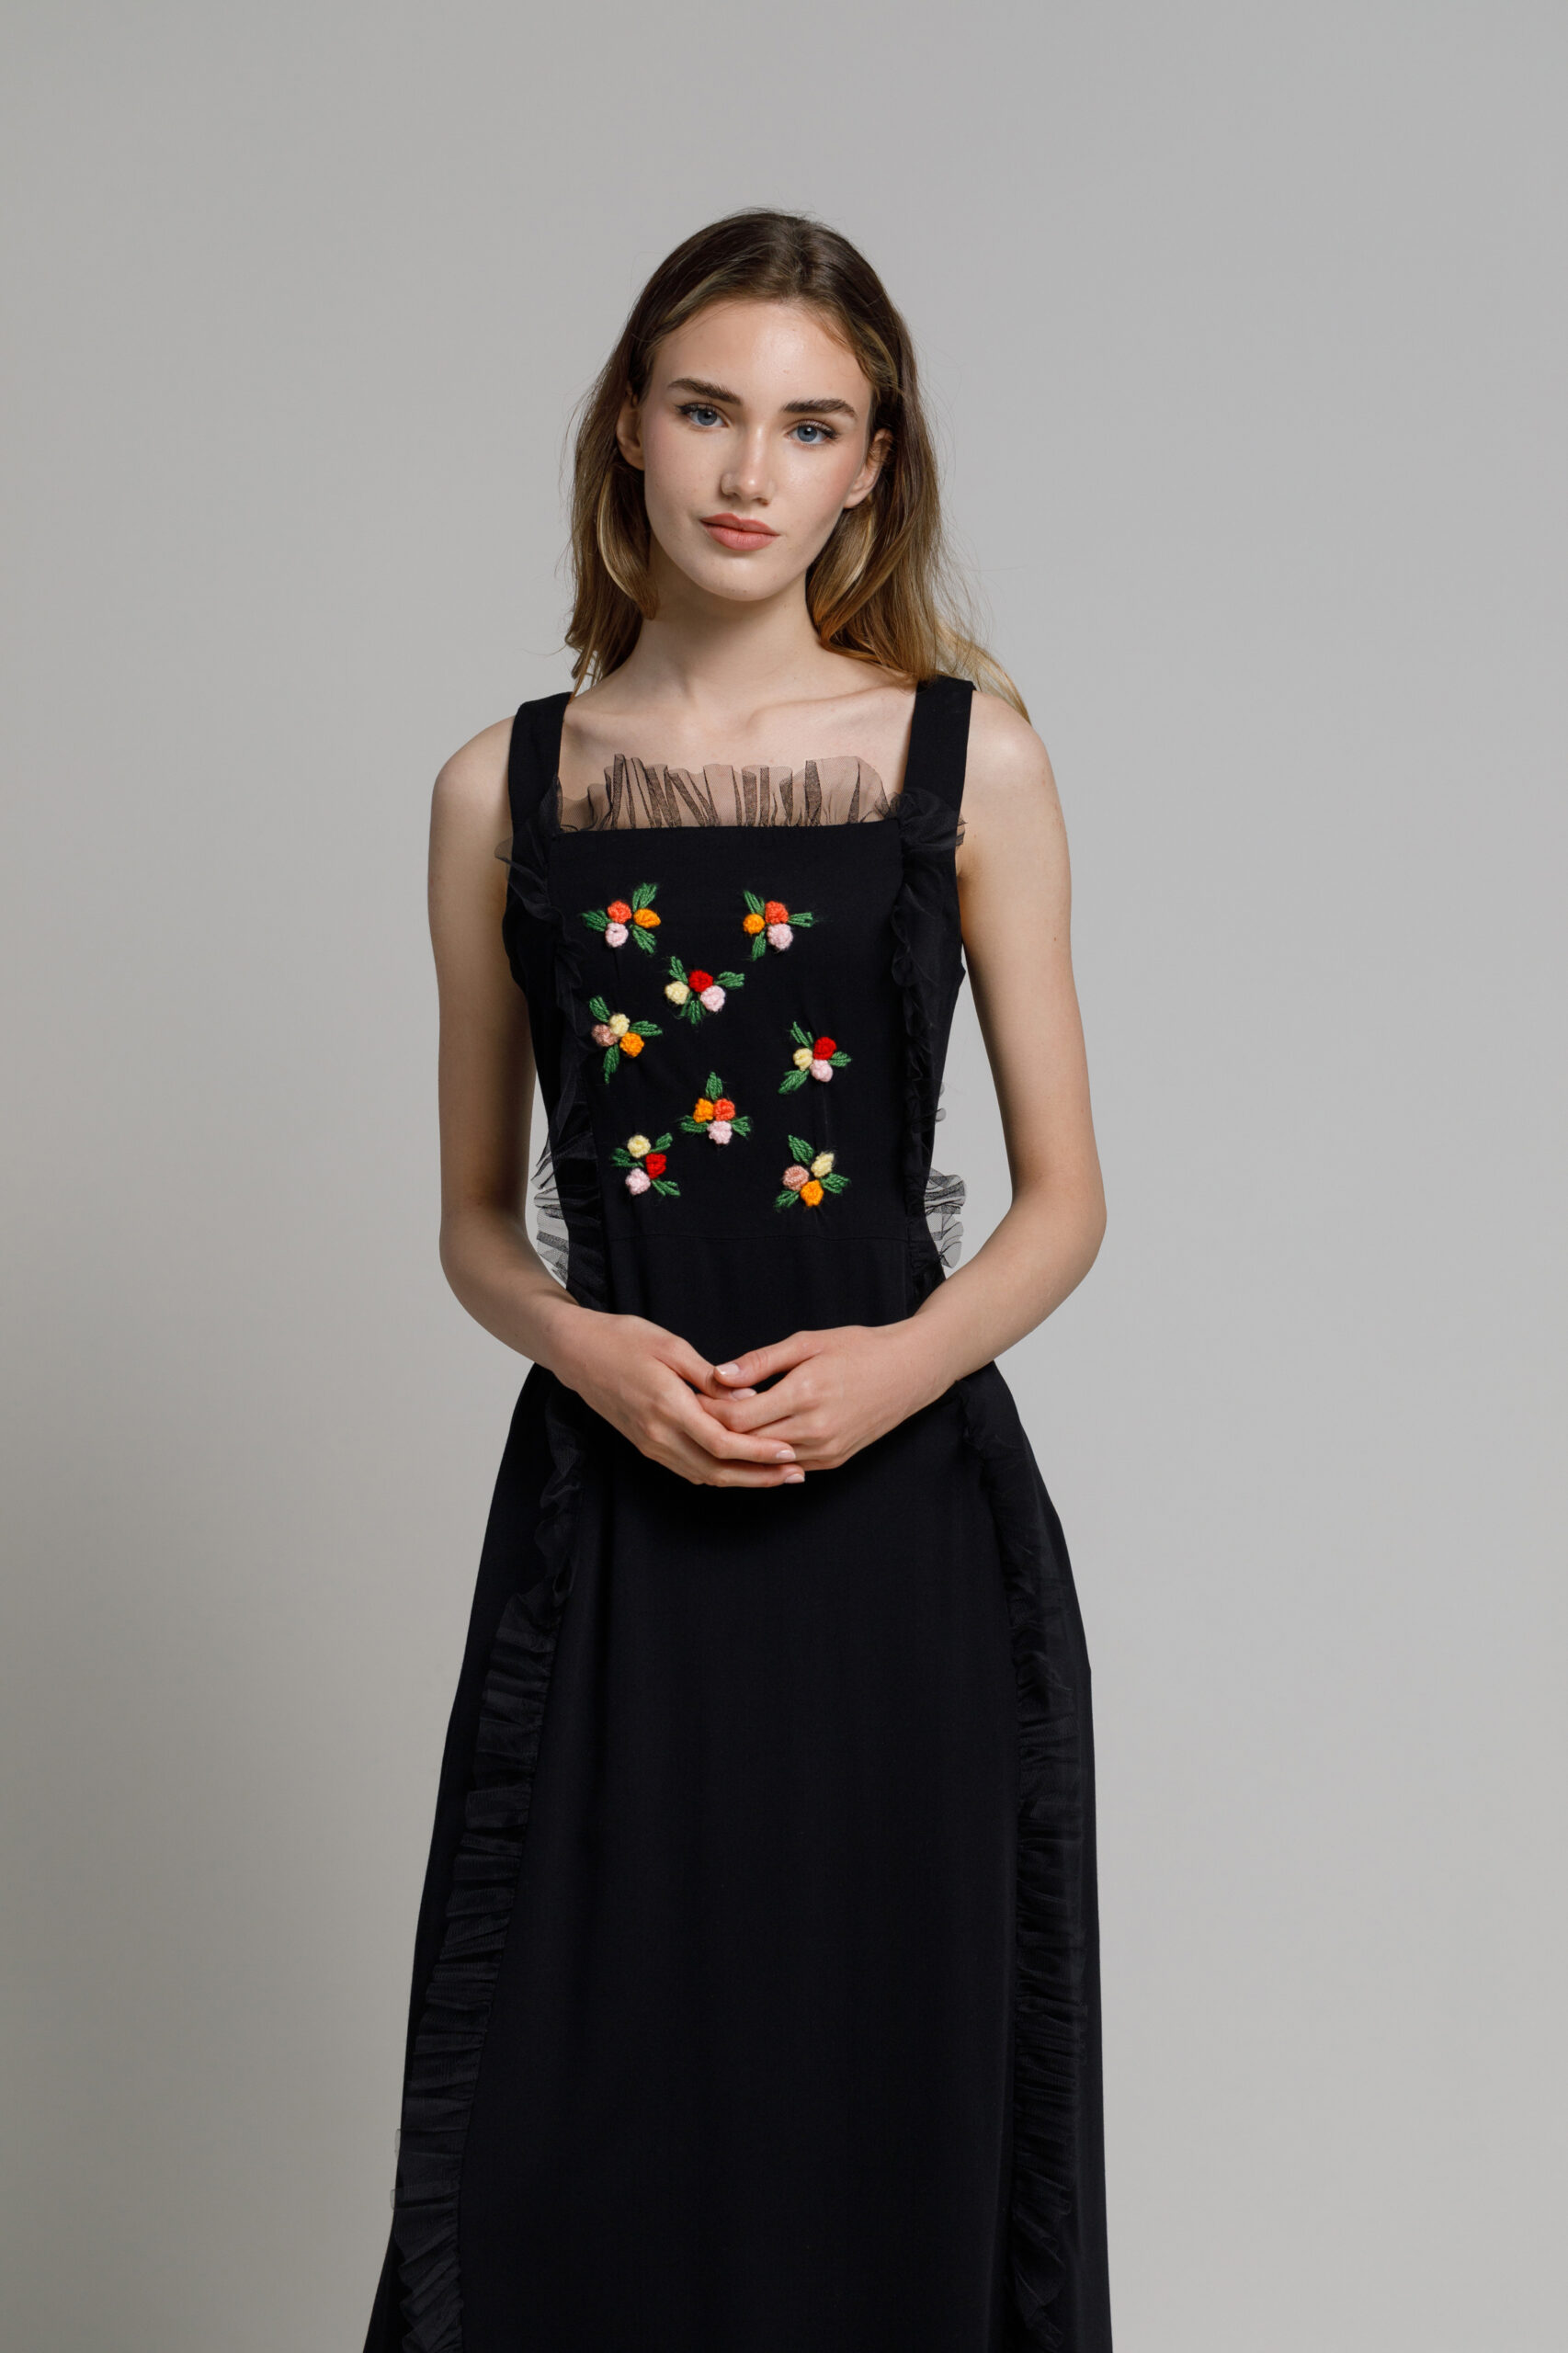 EDINA black dress with tulle frill and embroidery. Natural fabrics, original design, handmade embroidery